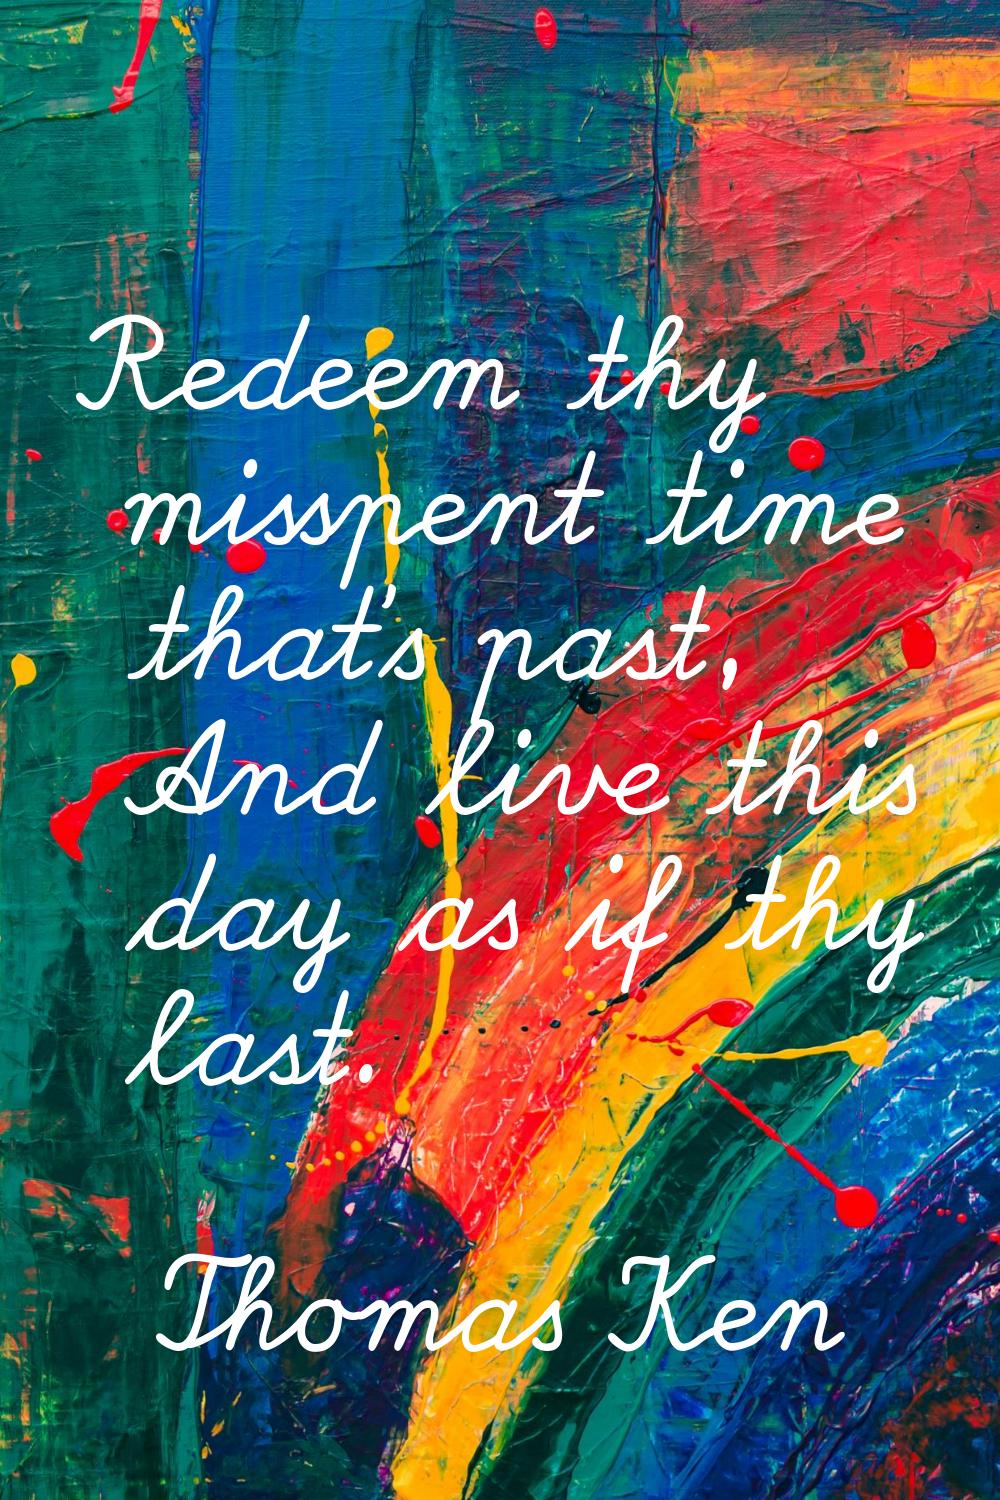 Redeem thy misspent time that's past, And live this day as if thy last.